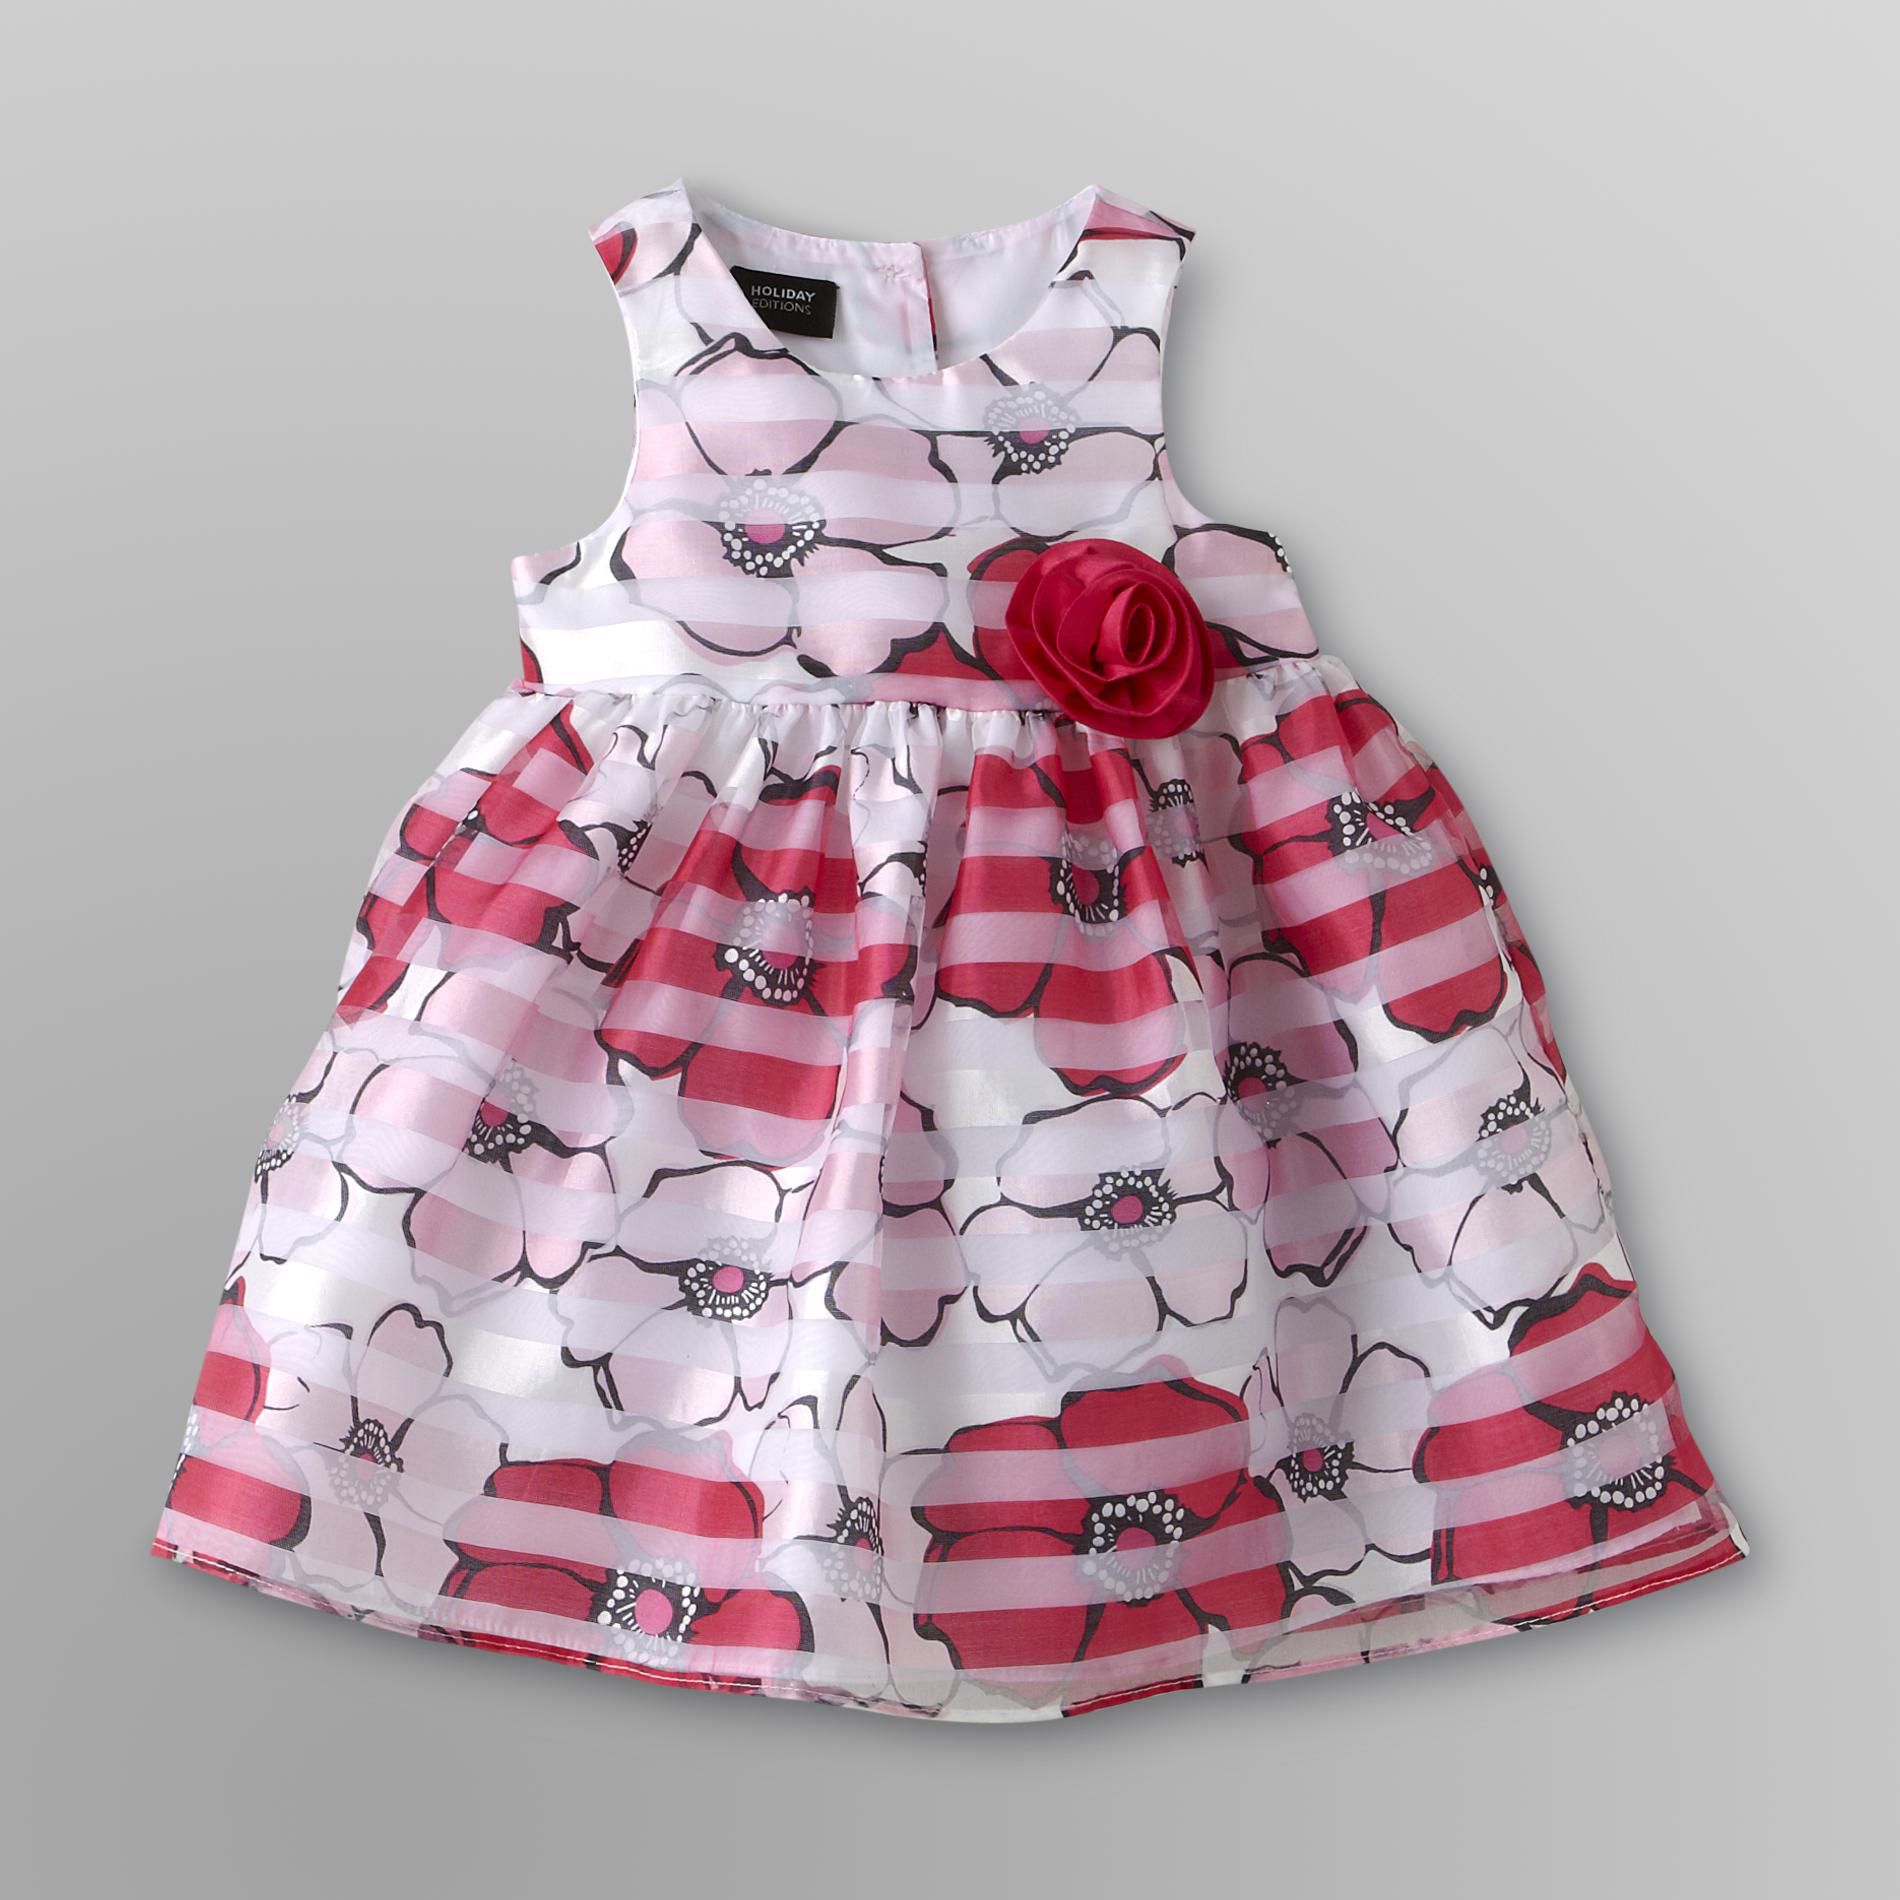 Holiday Editions Infant & Toddler Girl's Party Dress - Pink Floral